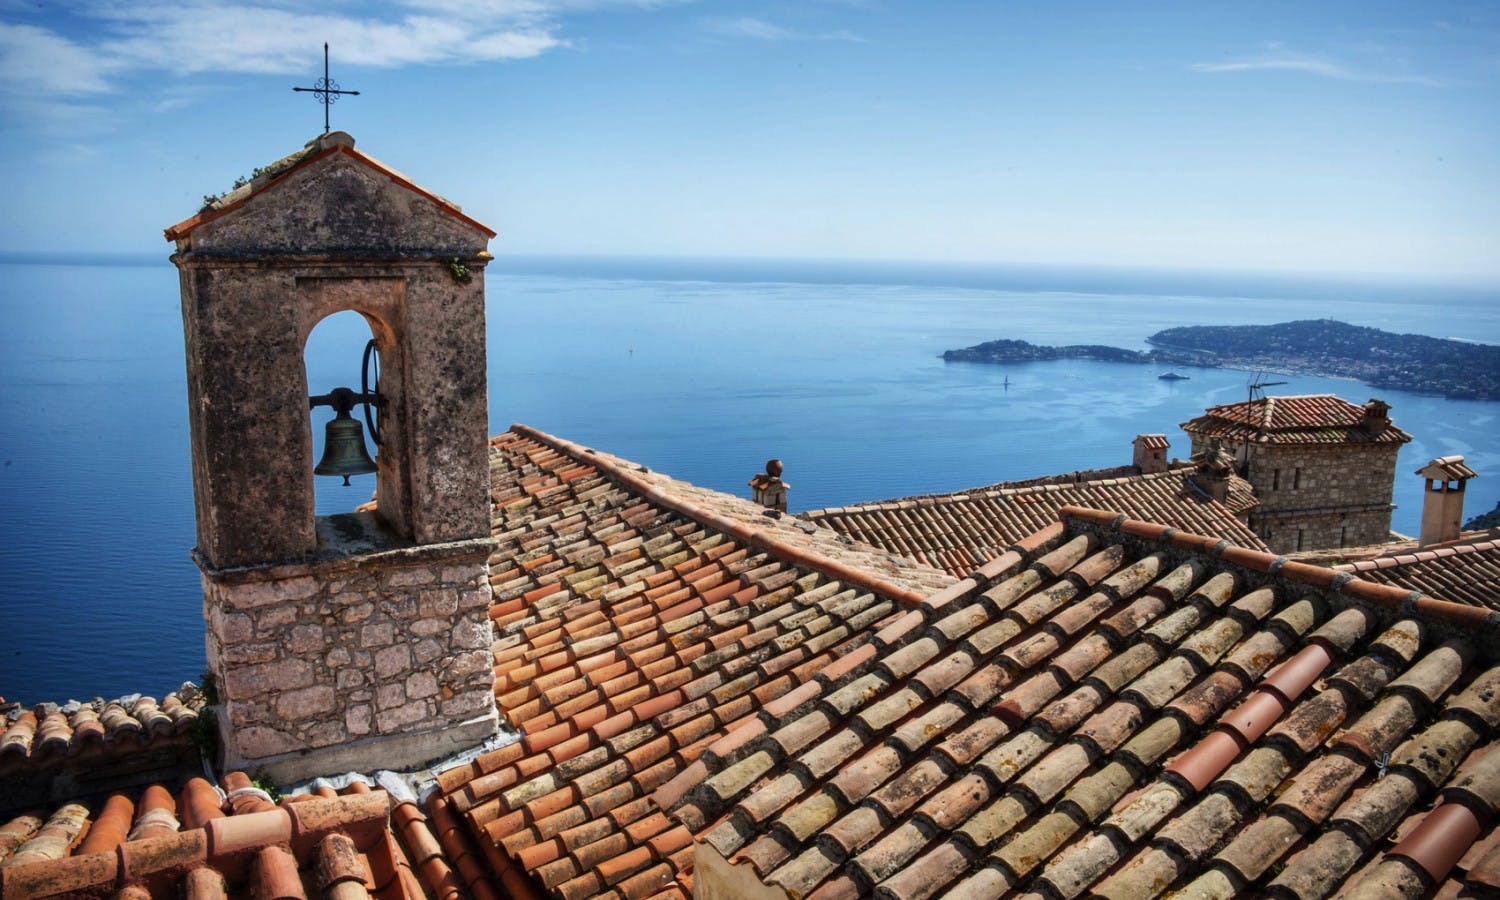 cote d'azur roofs with sea view.jpg